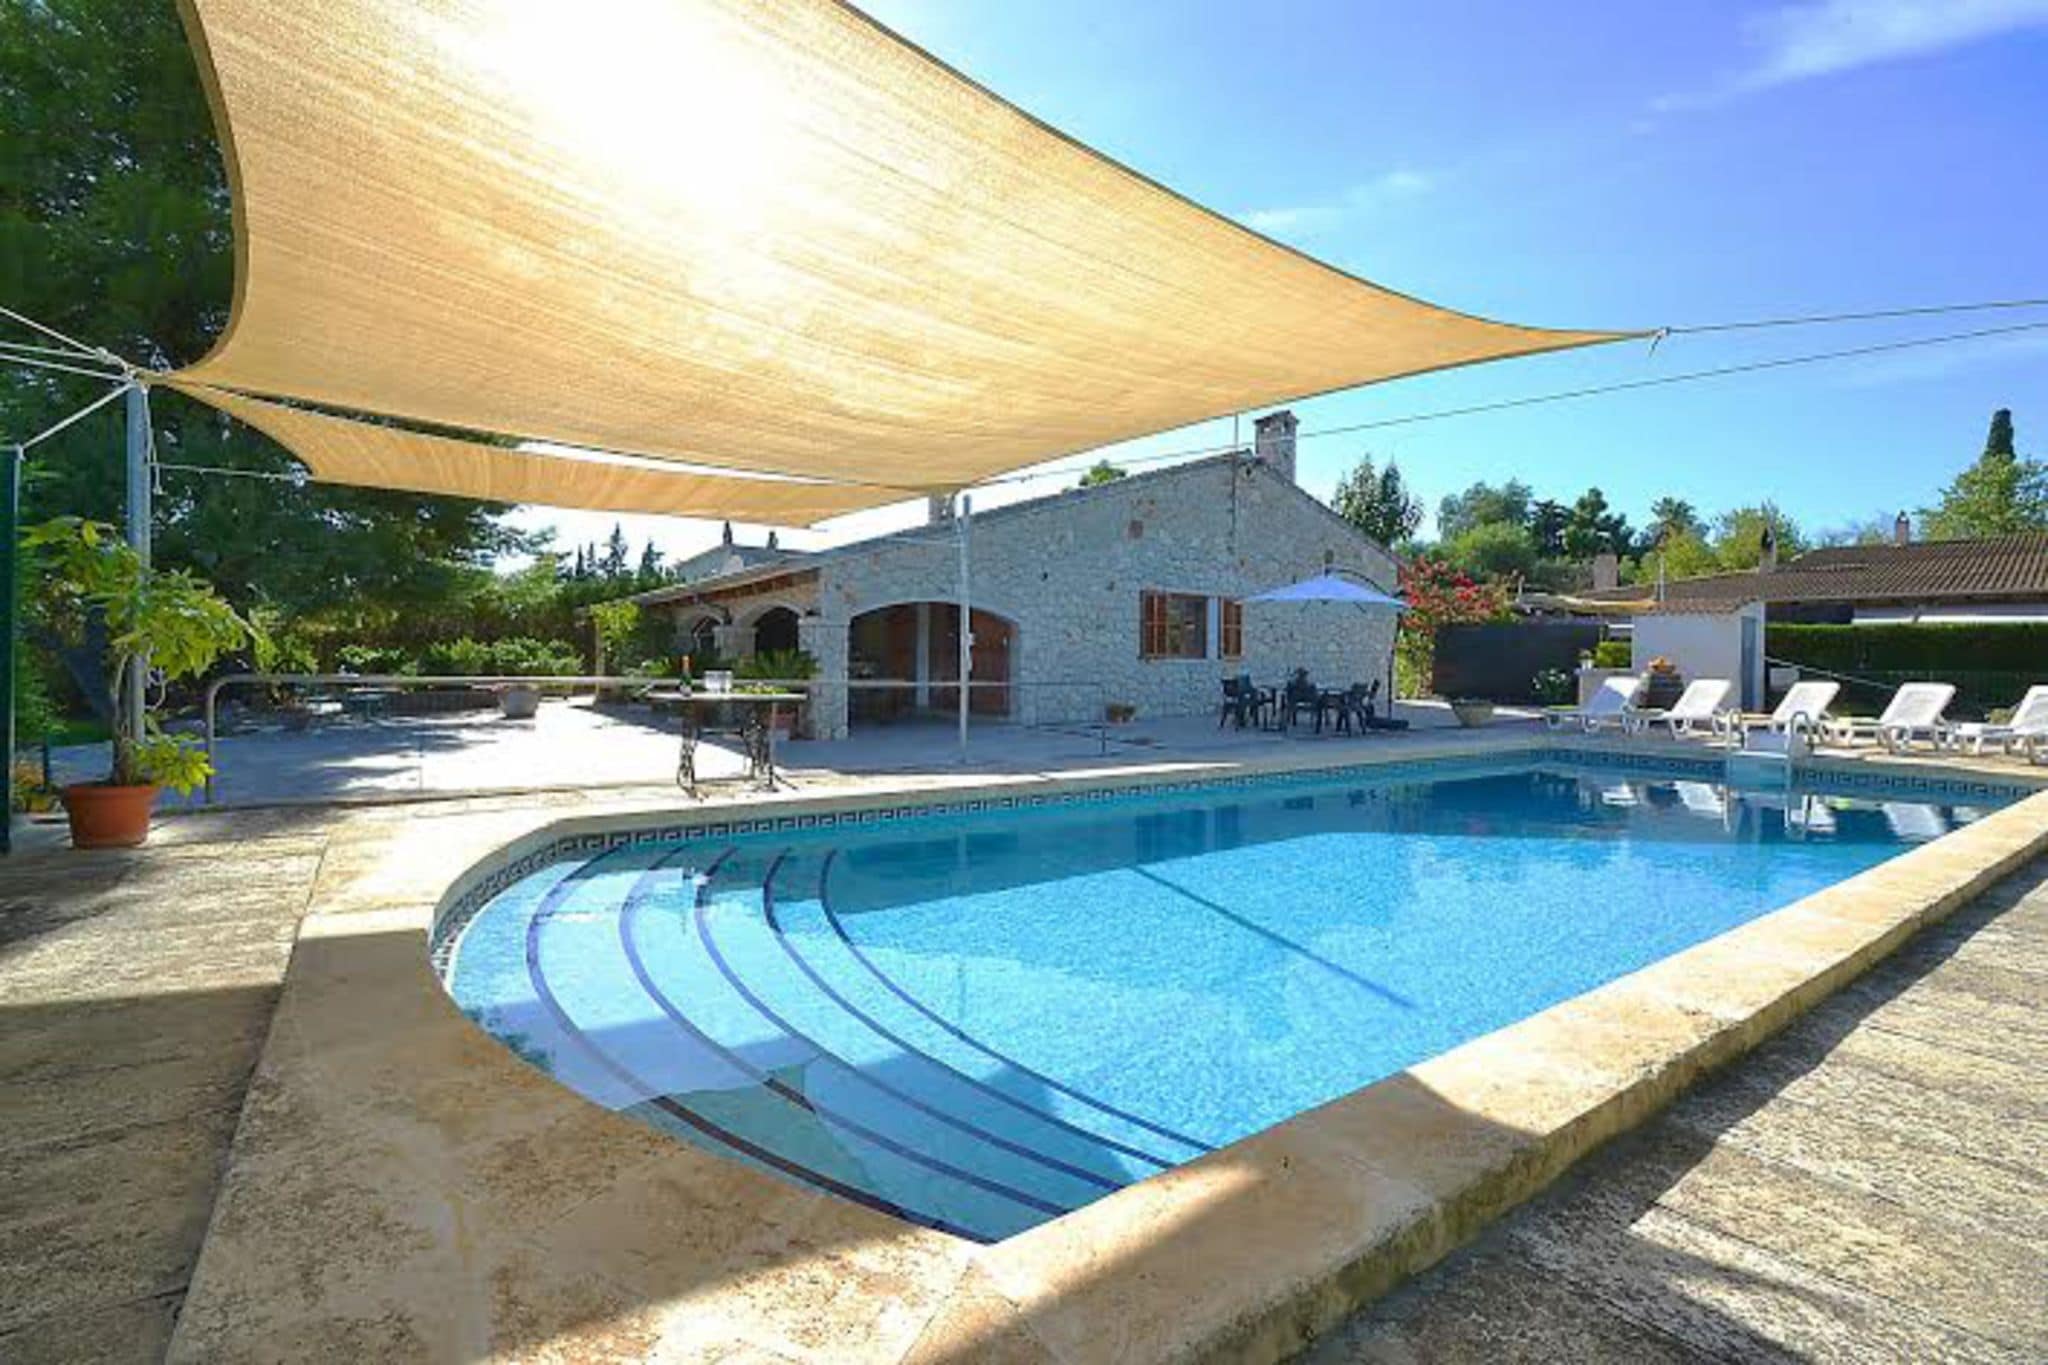 Nice villa with pool is located outside the picturesque village of Binissalem